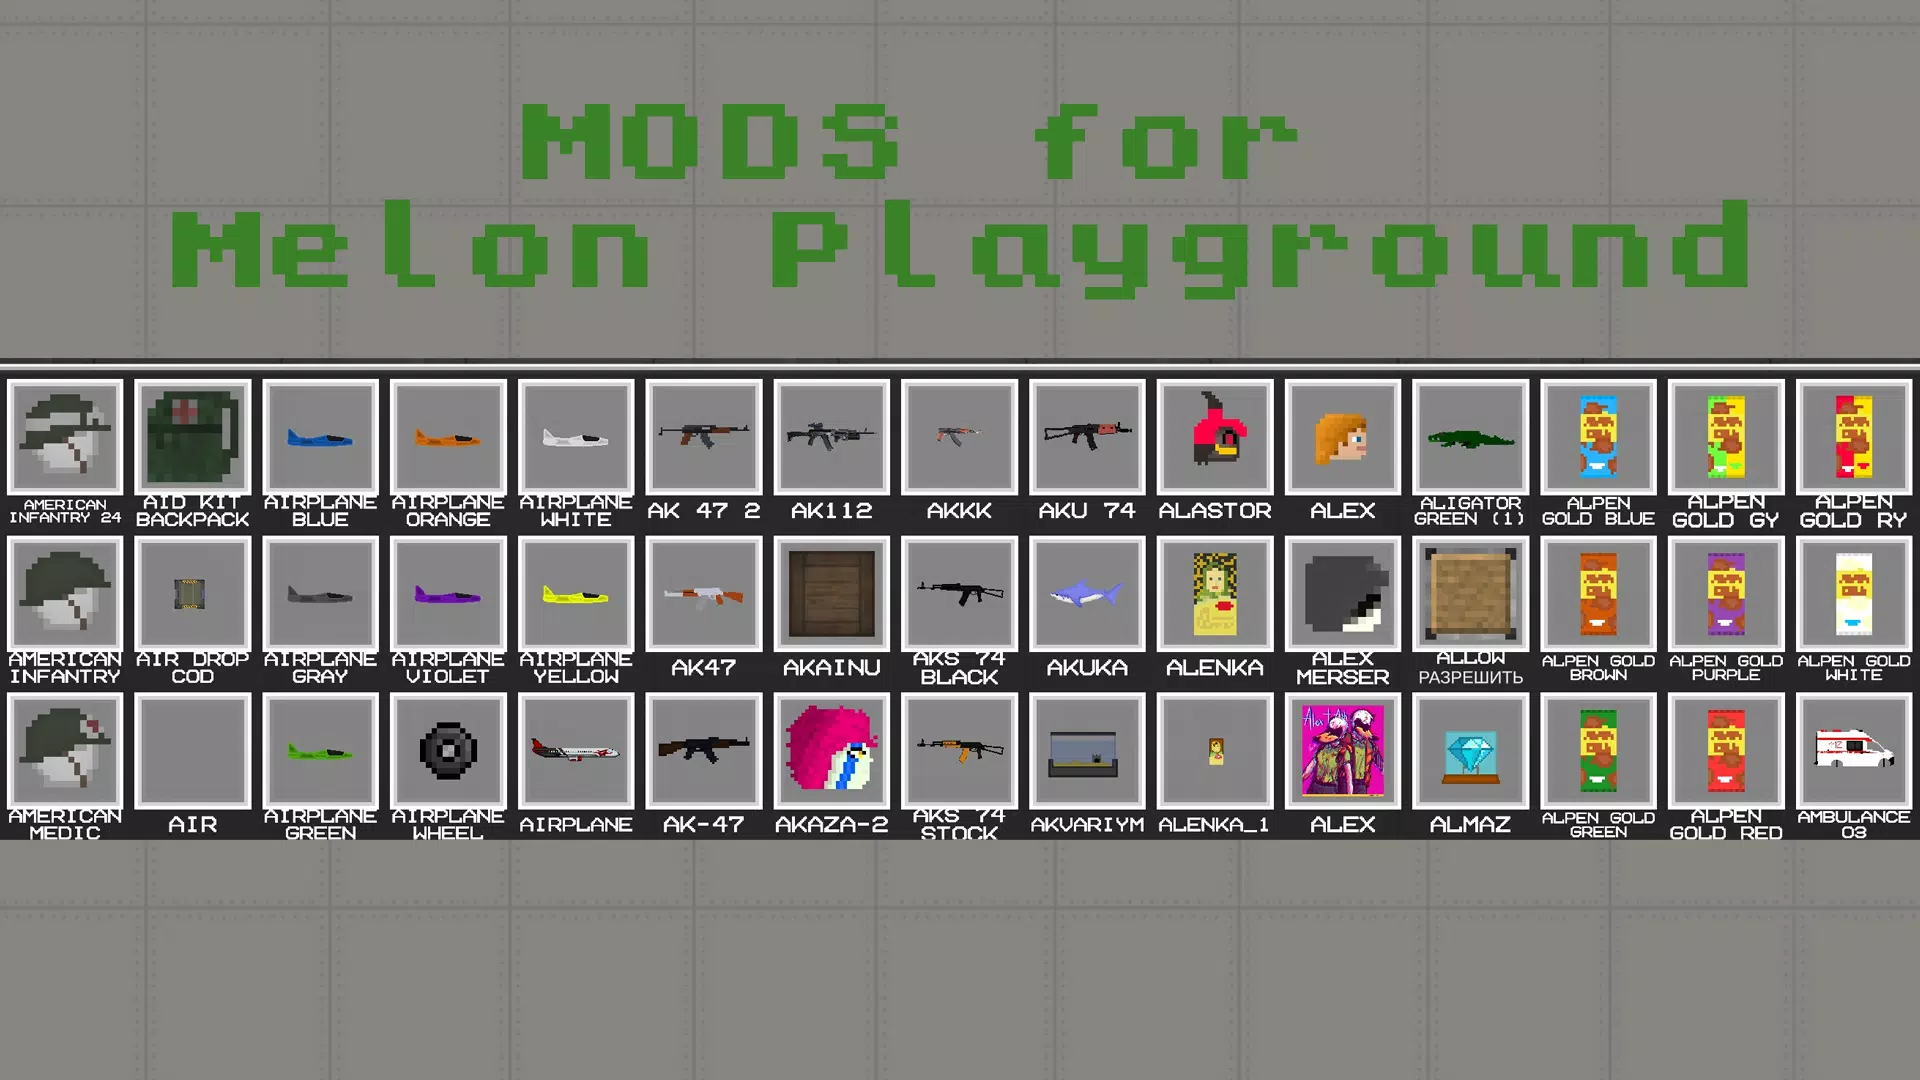 Top 5 Best Melon Playground Mods to Play